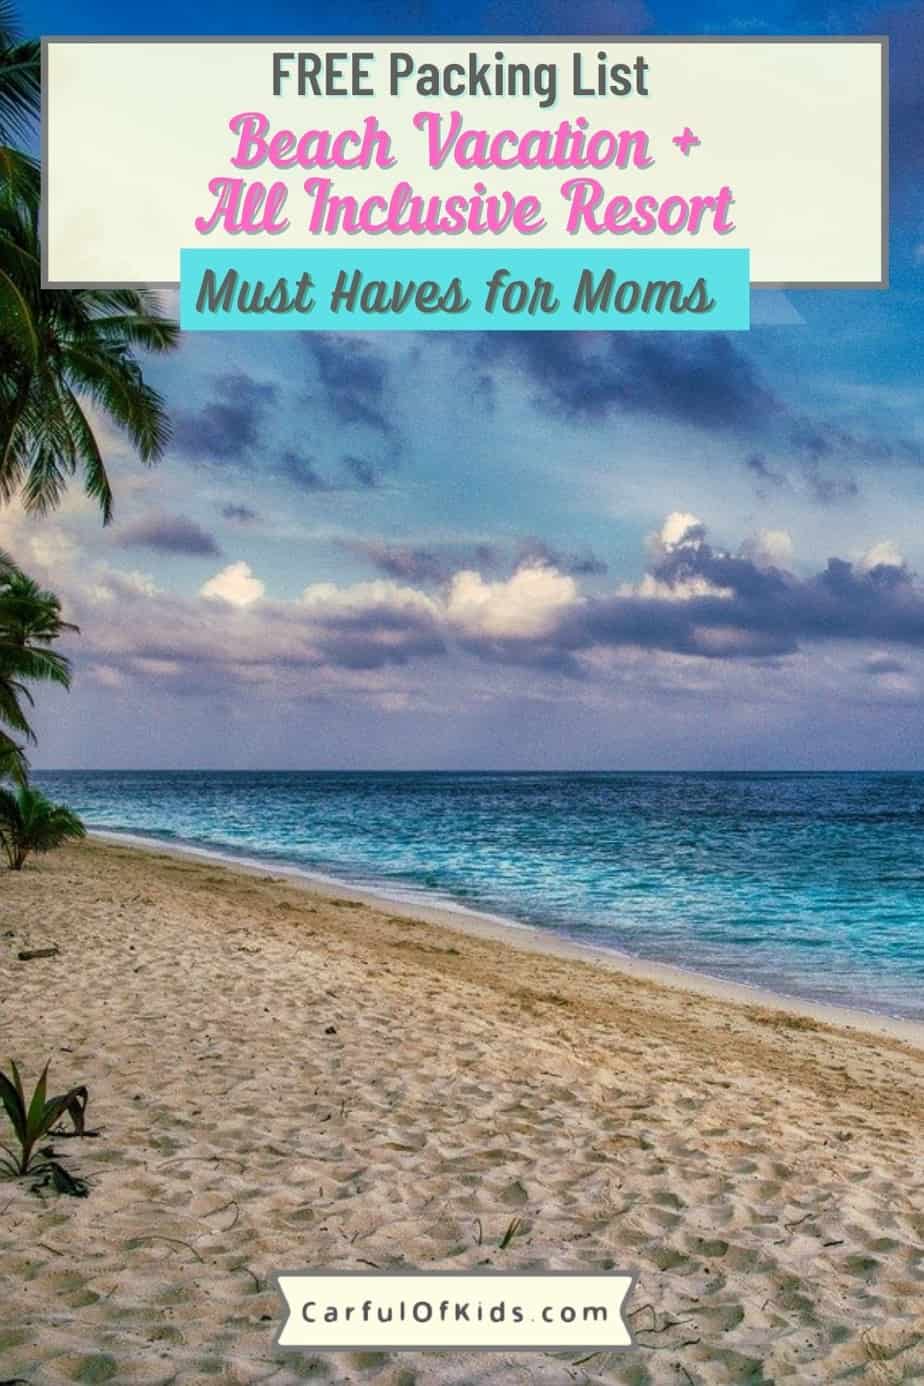 Your beach trip is booked. Now it's time to go shopping for some must haves for Moms. Look glamorous and comfortable this trip with these Mom Must Haves. #Beach #PackingList